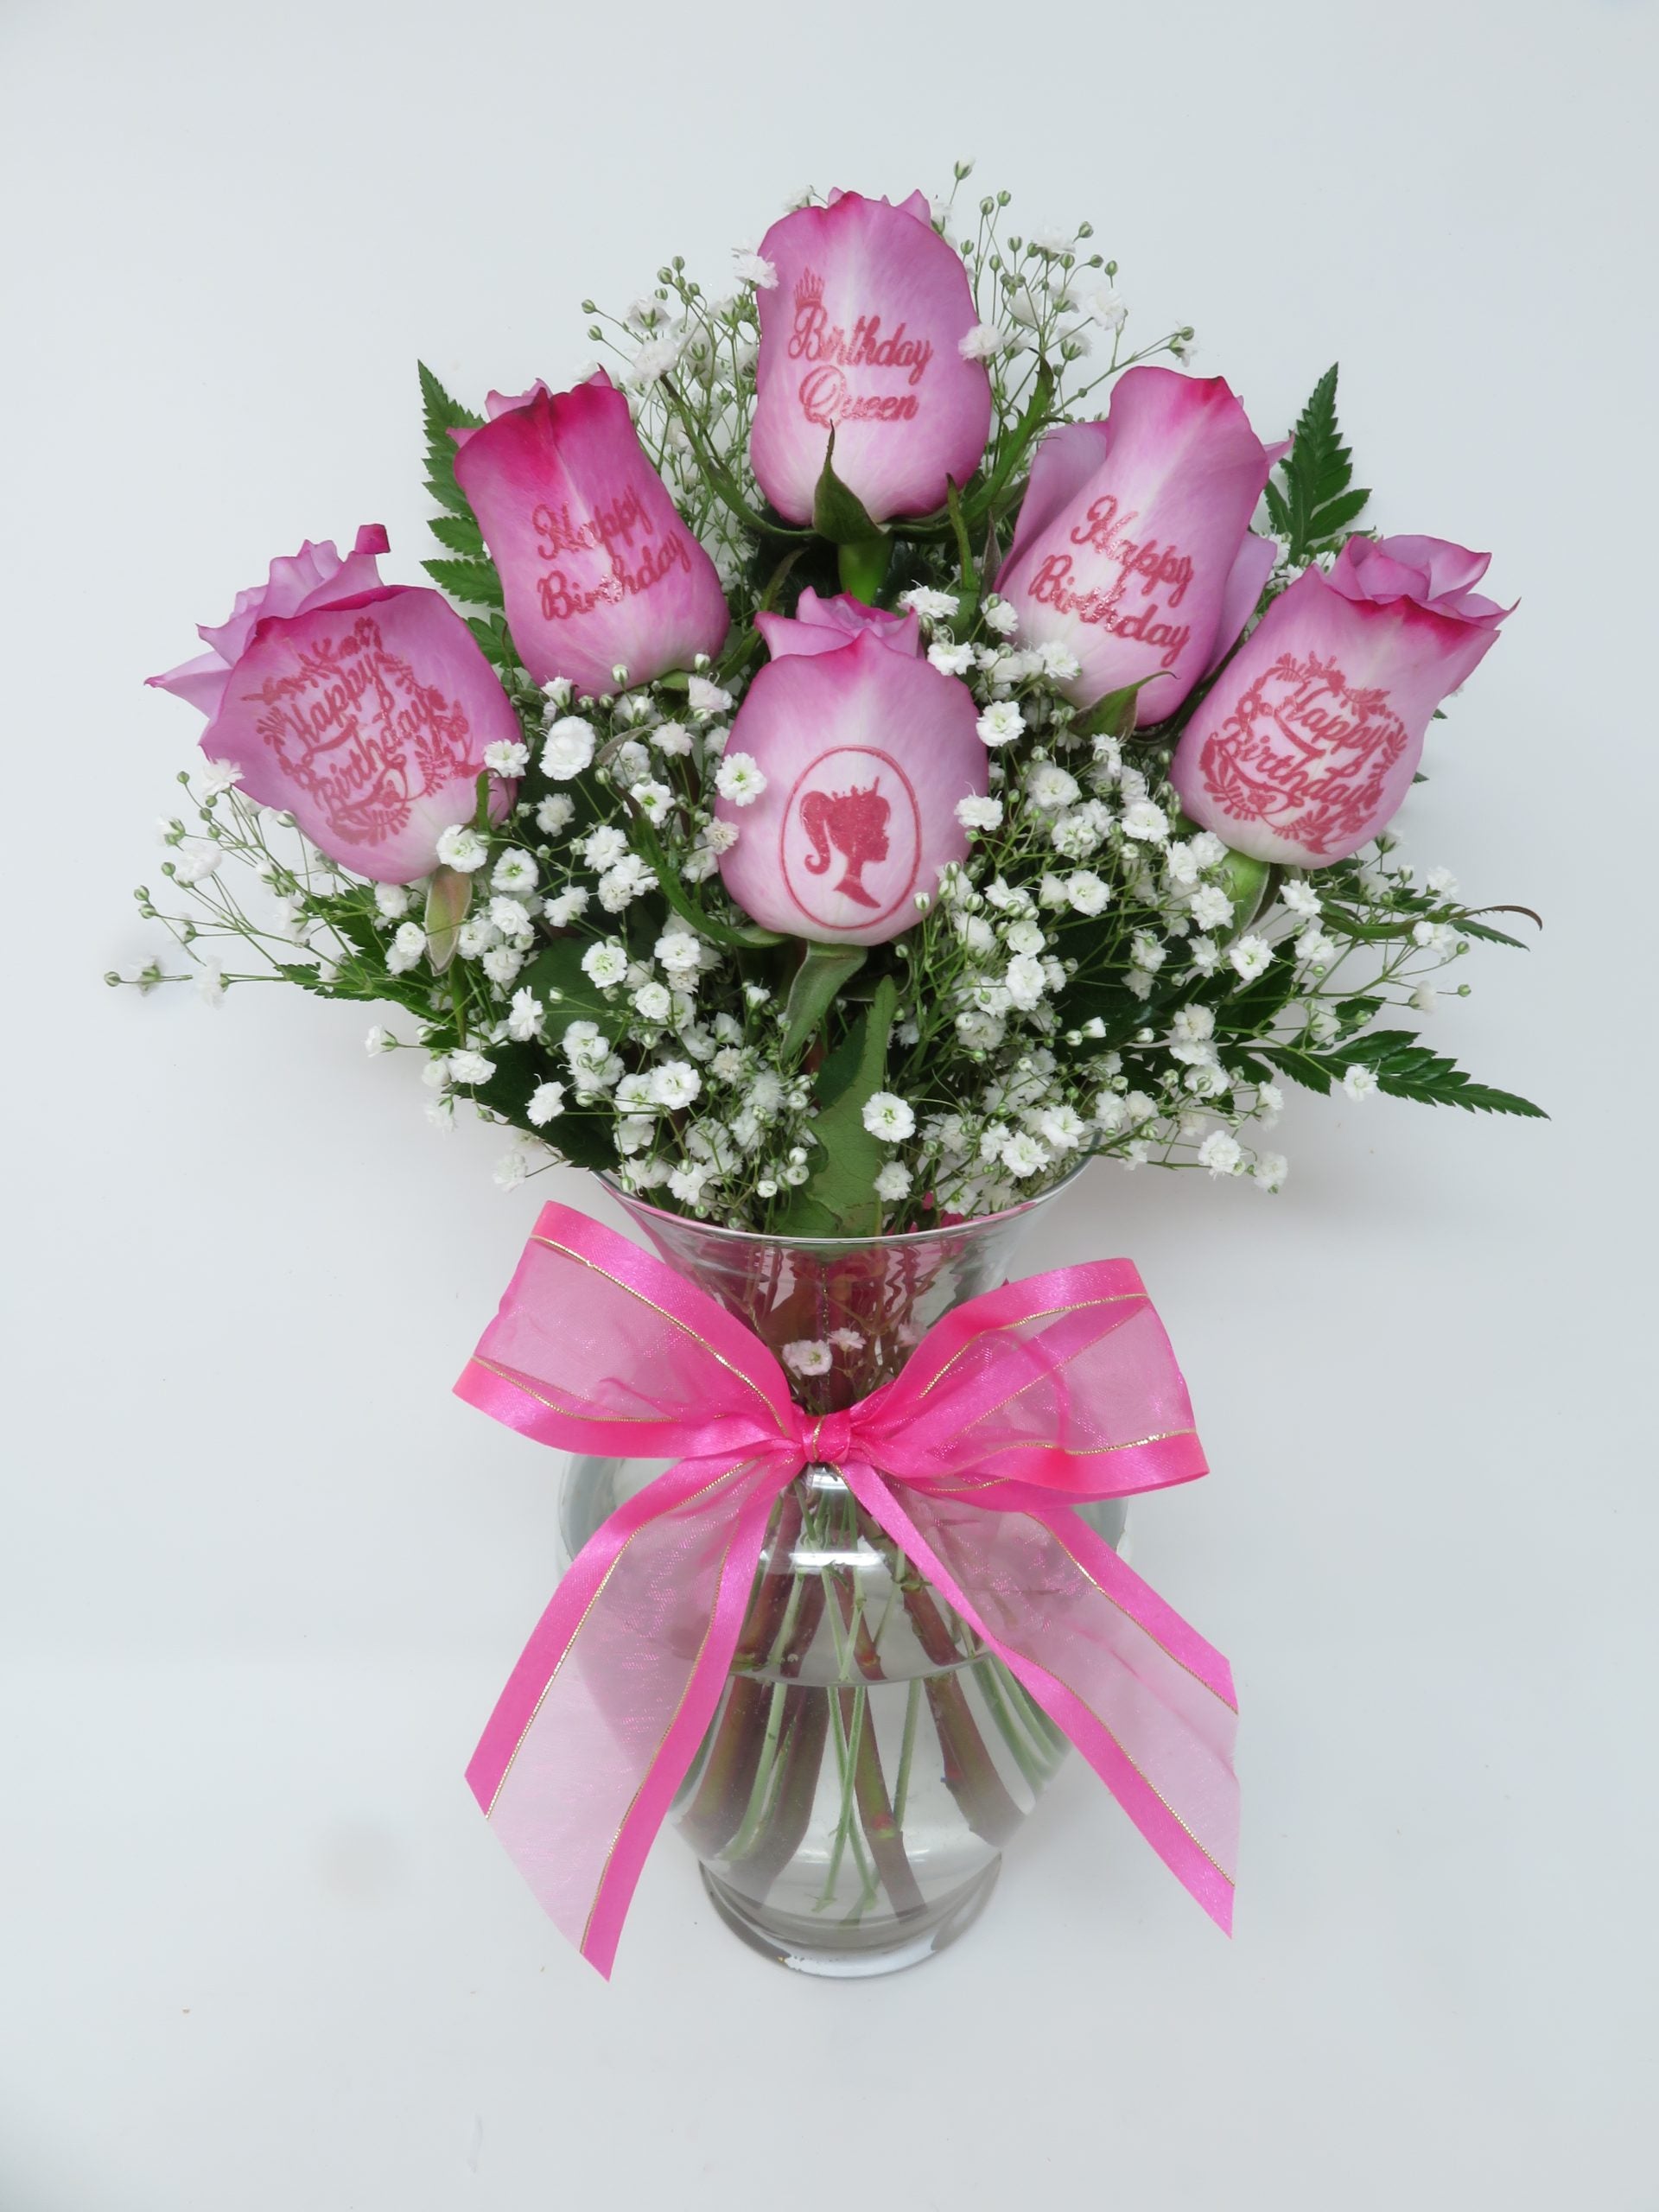 bouquet of pink roses for birthday